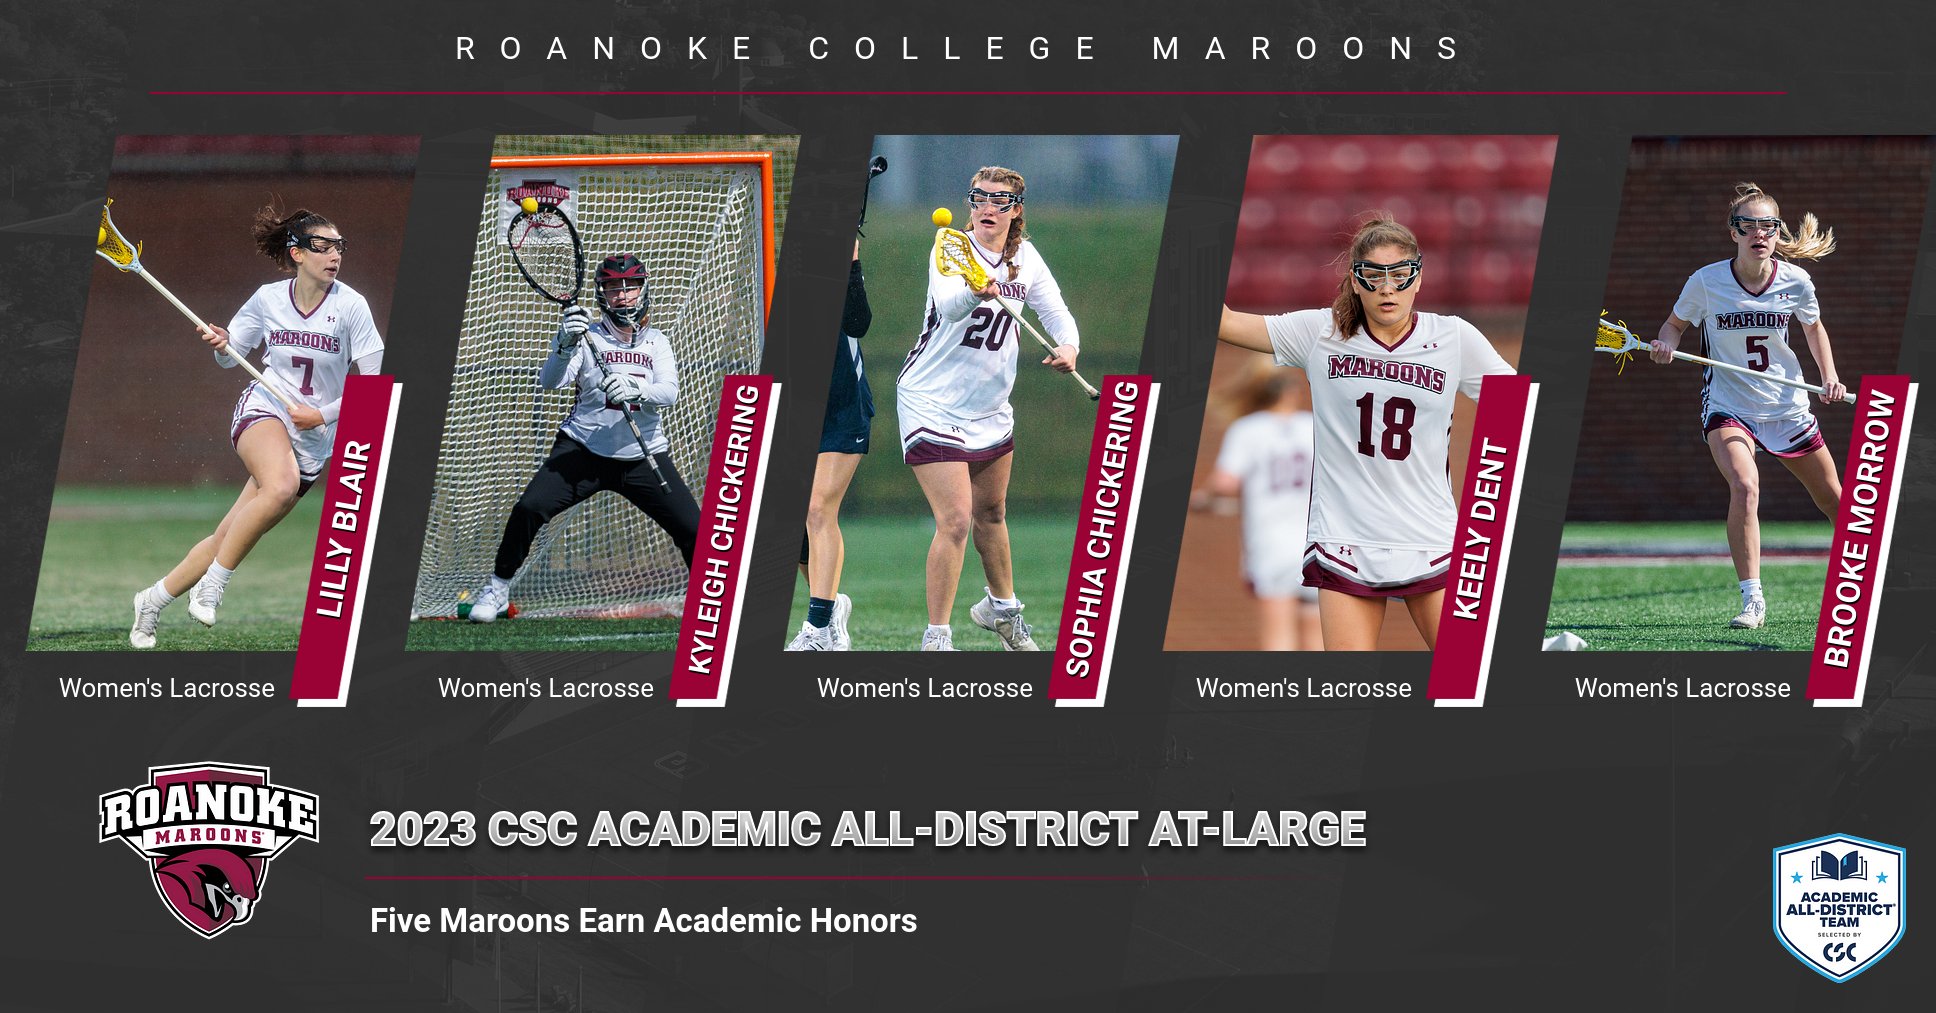 Five Women's Lacrosse Players Named to CSC Academic All-District